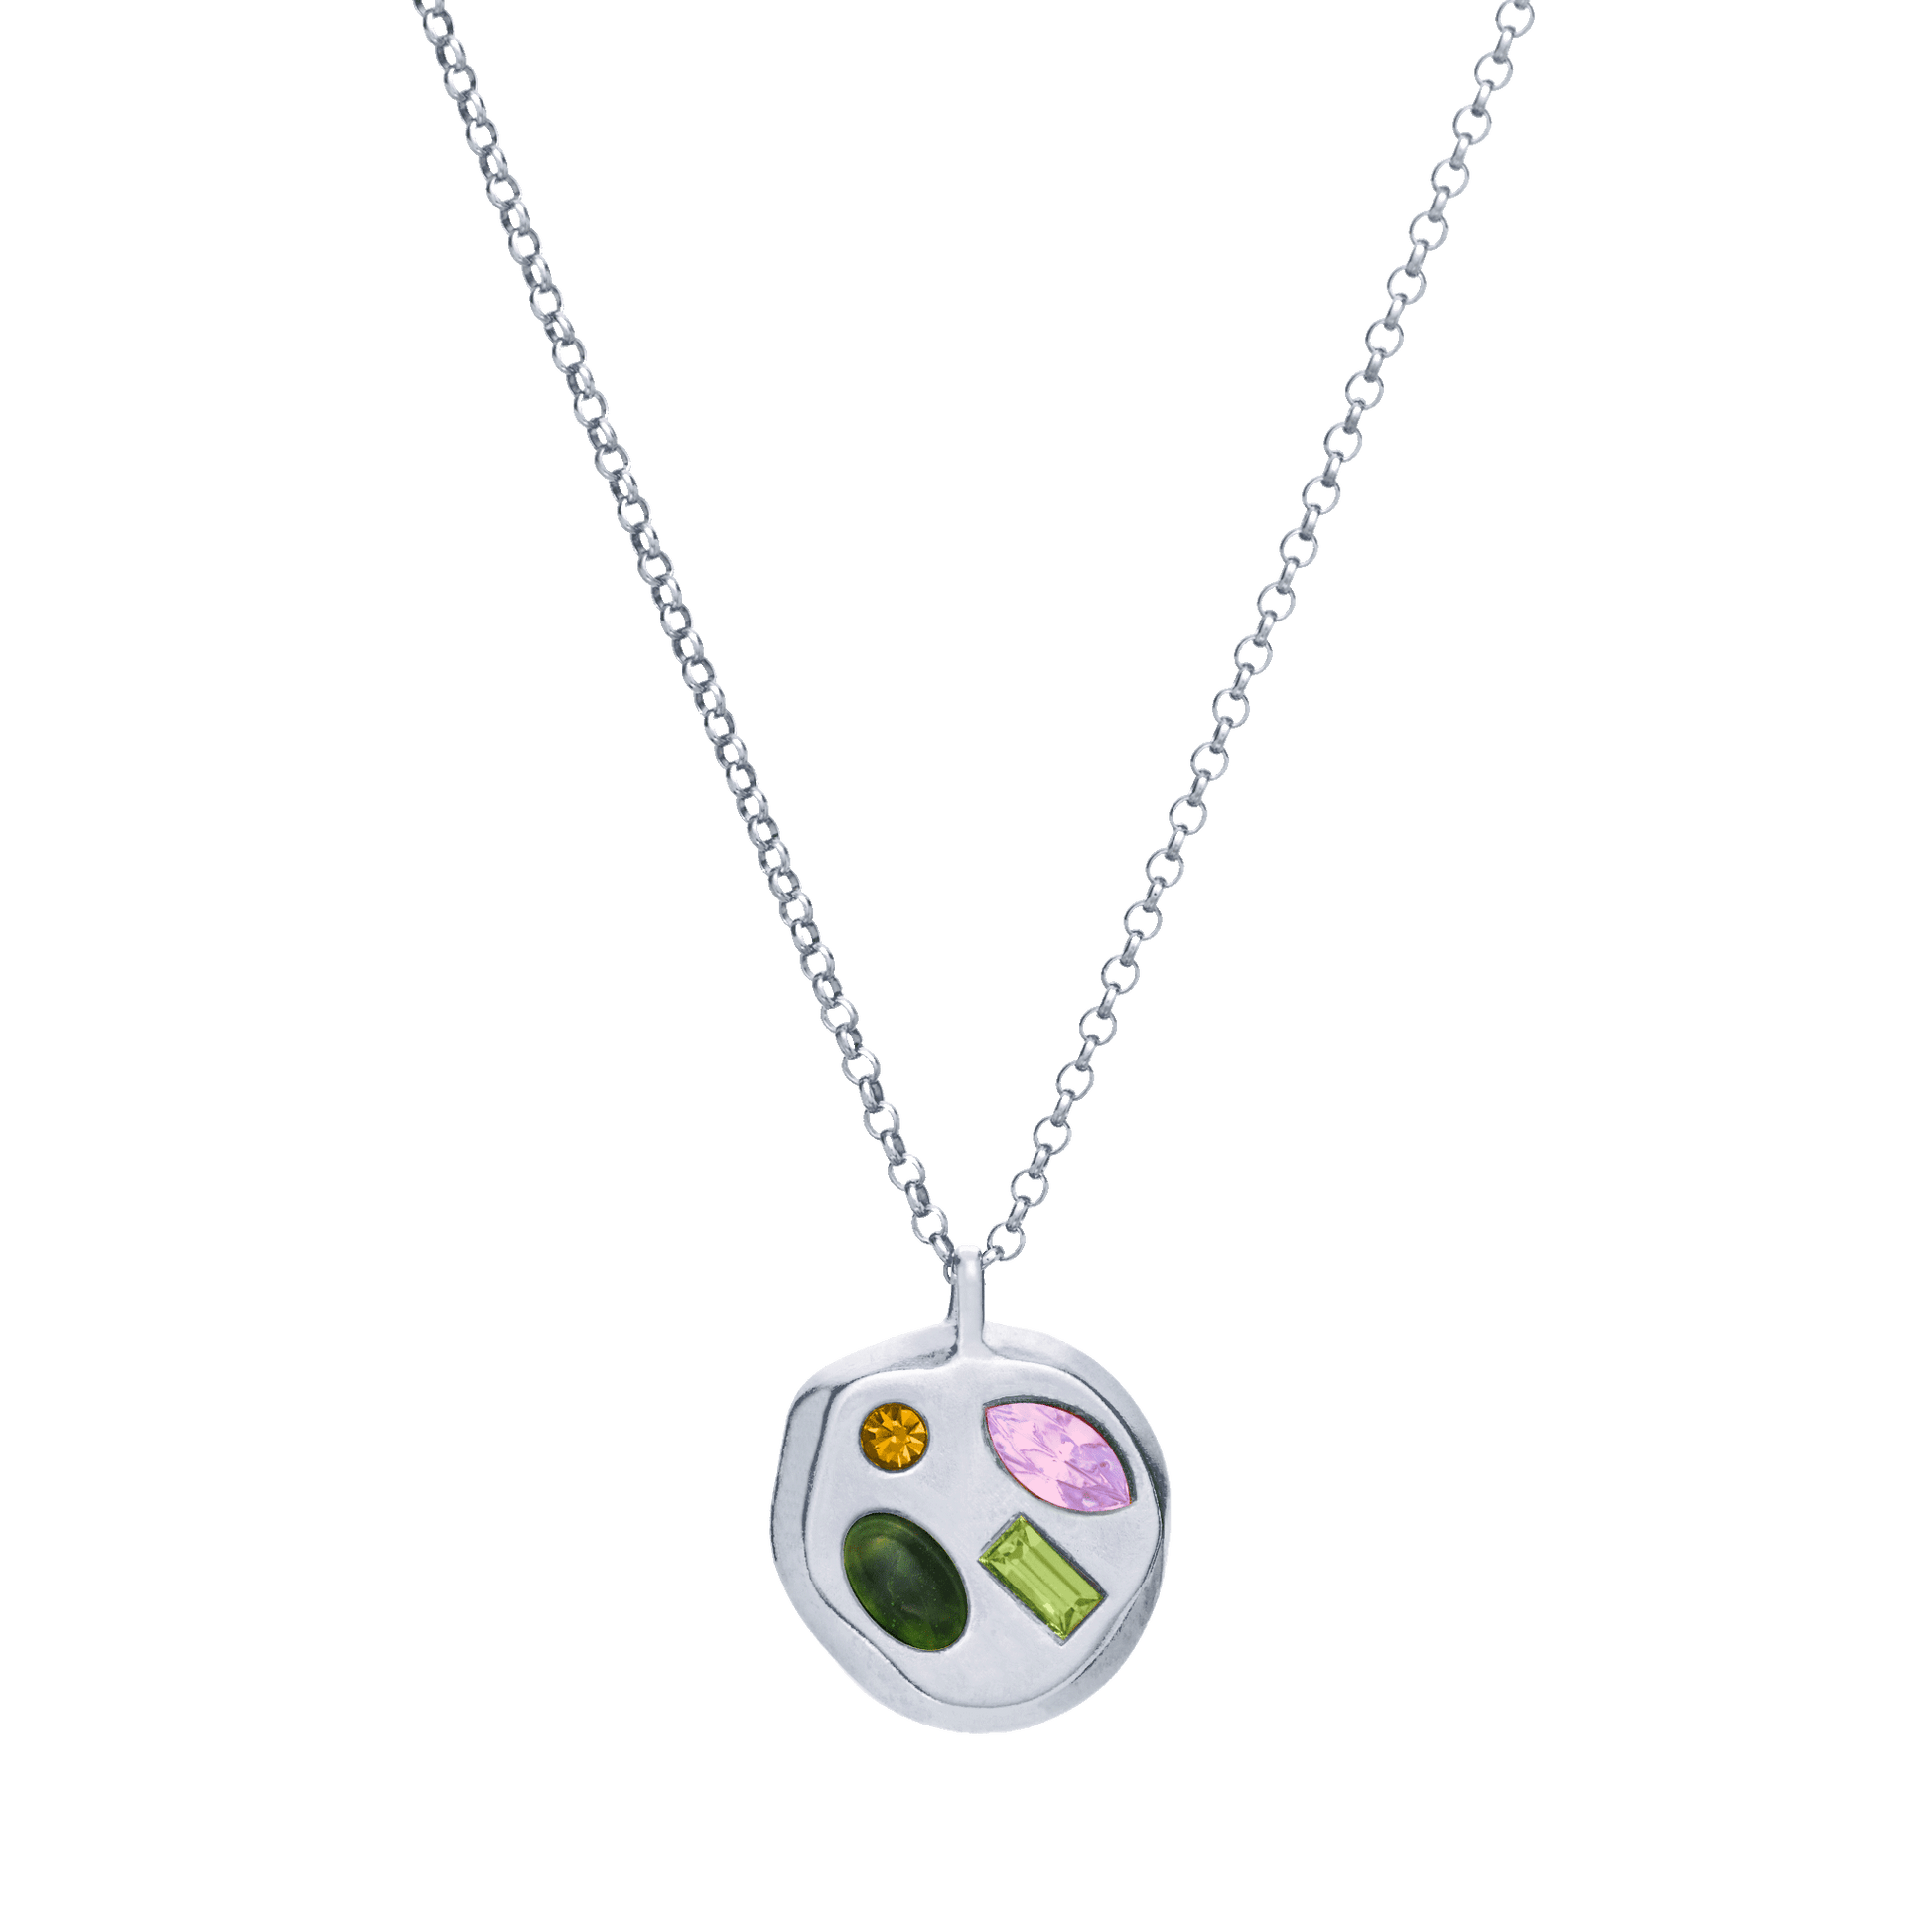 The June Eighth Pendant in Sterling Silver